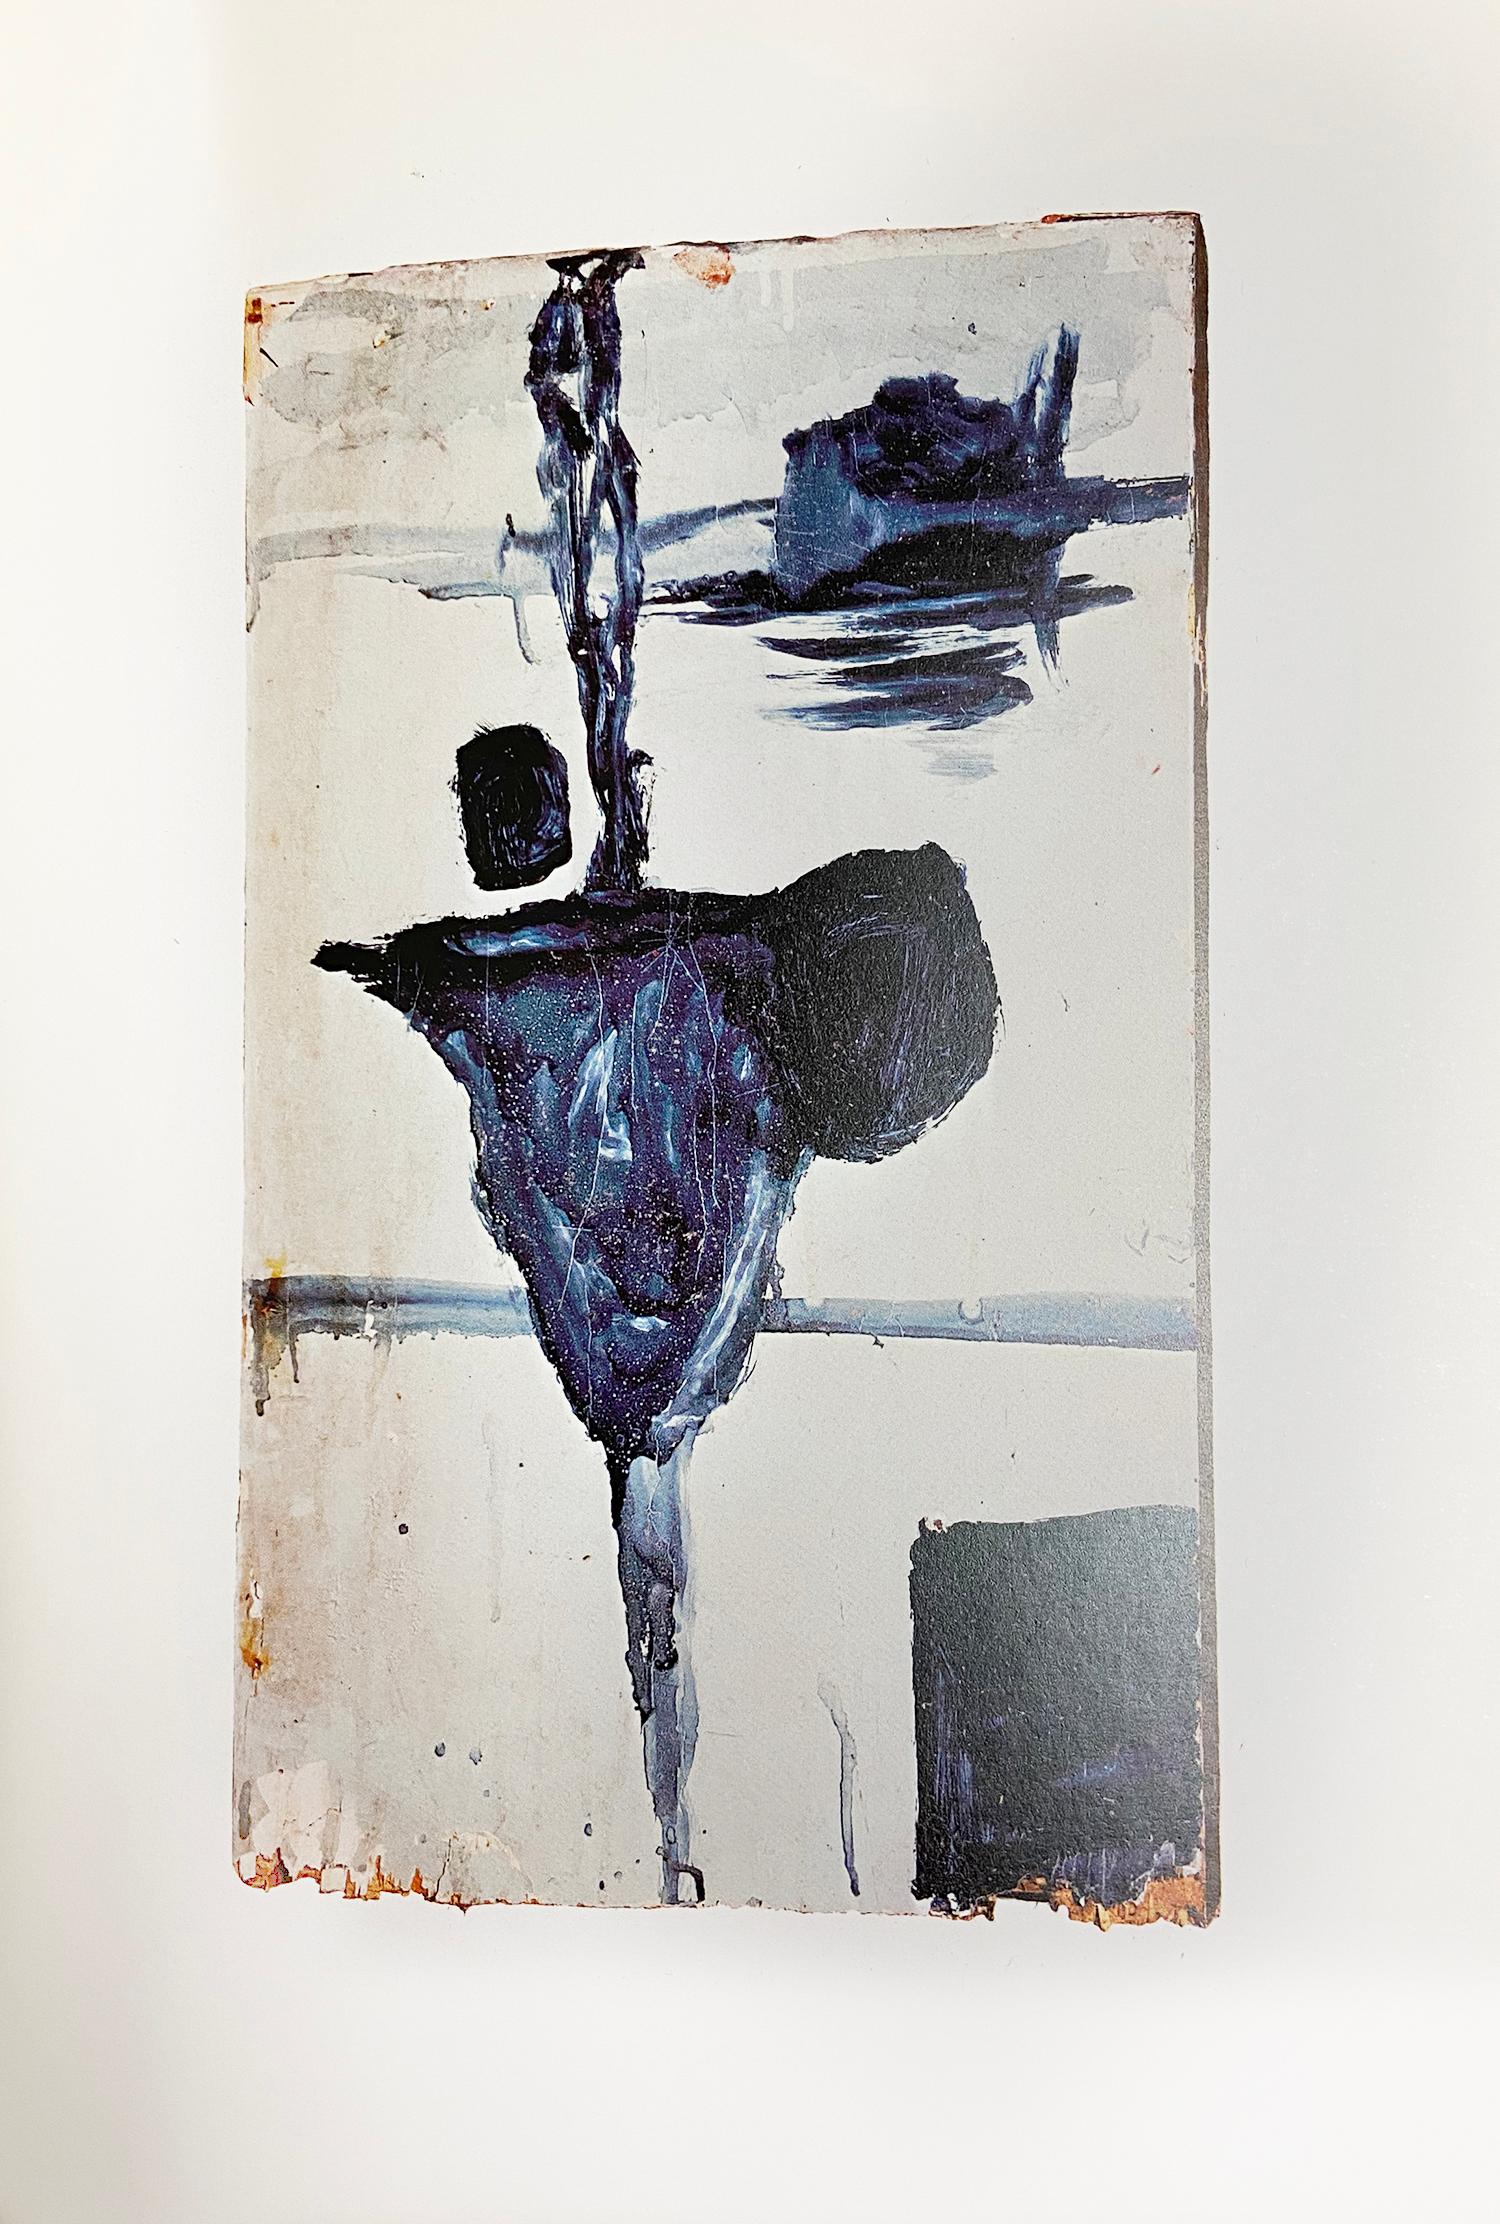 Signed Julian Schnabel: Angelo d'Oro 1985 catalogue:
Published on the occasion of the exhibition Julian Schnabel: Angelo d’oro  at Galleria Gian Enzo Sperone, Rome, October 1985.

Hand signed with an inscription by Schnabel to the historic critic